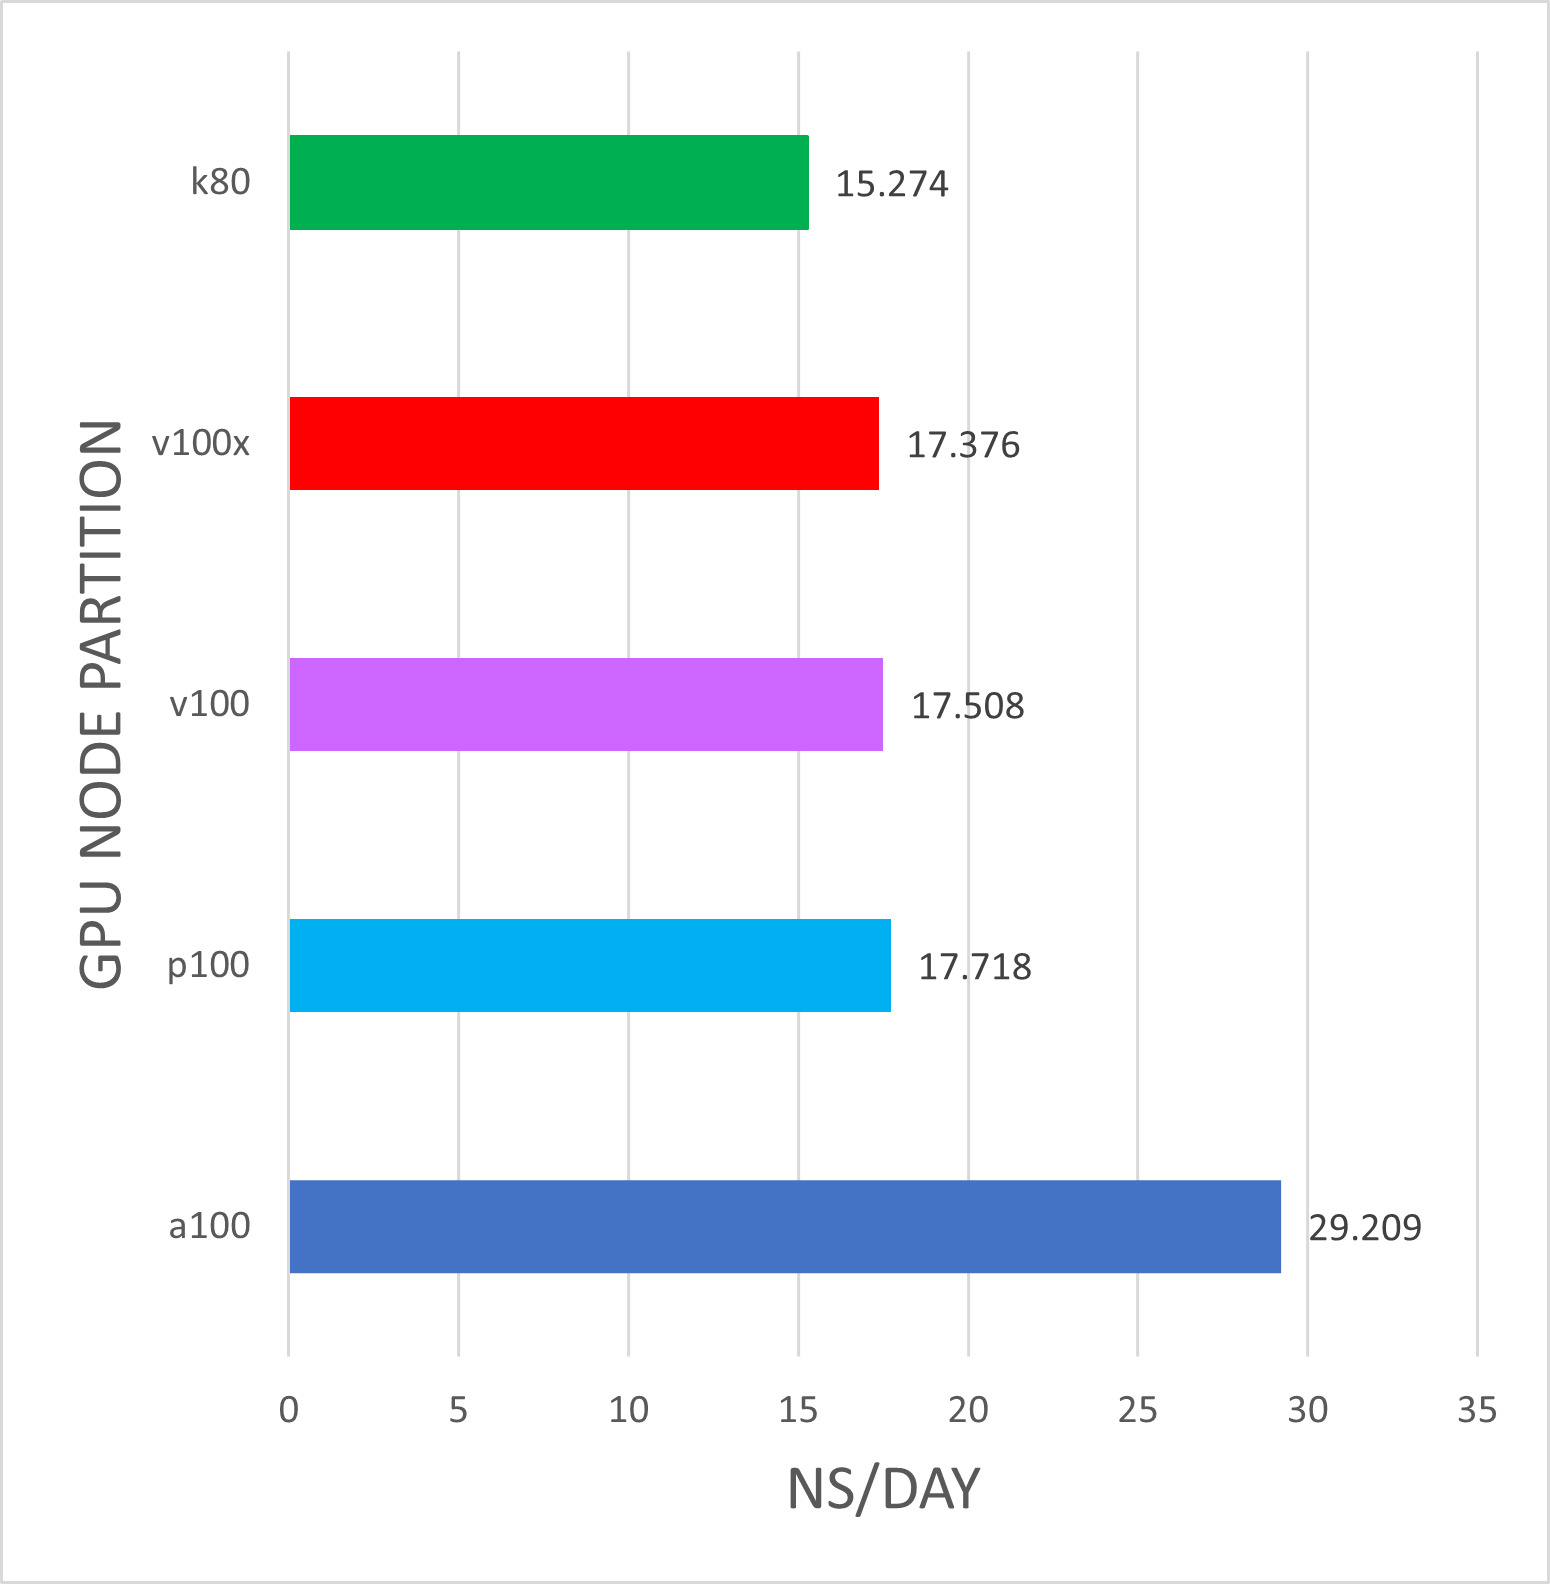 GROMACS GPU Benchmark and Hardware Recommendations